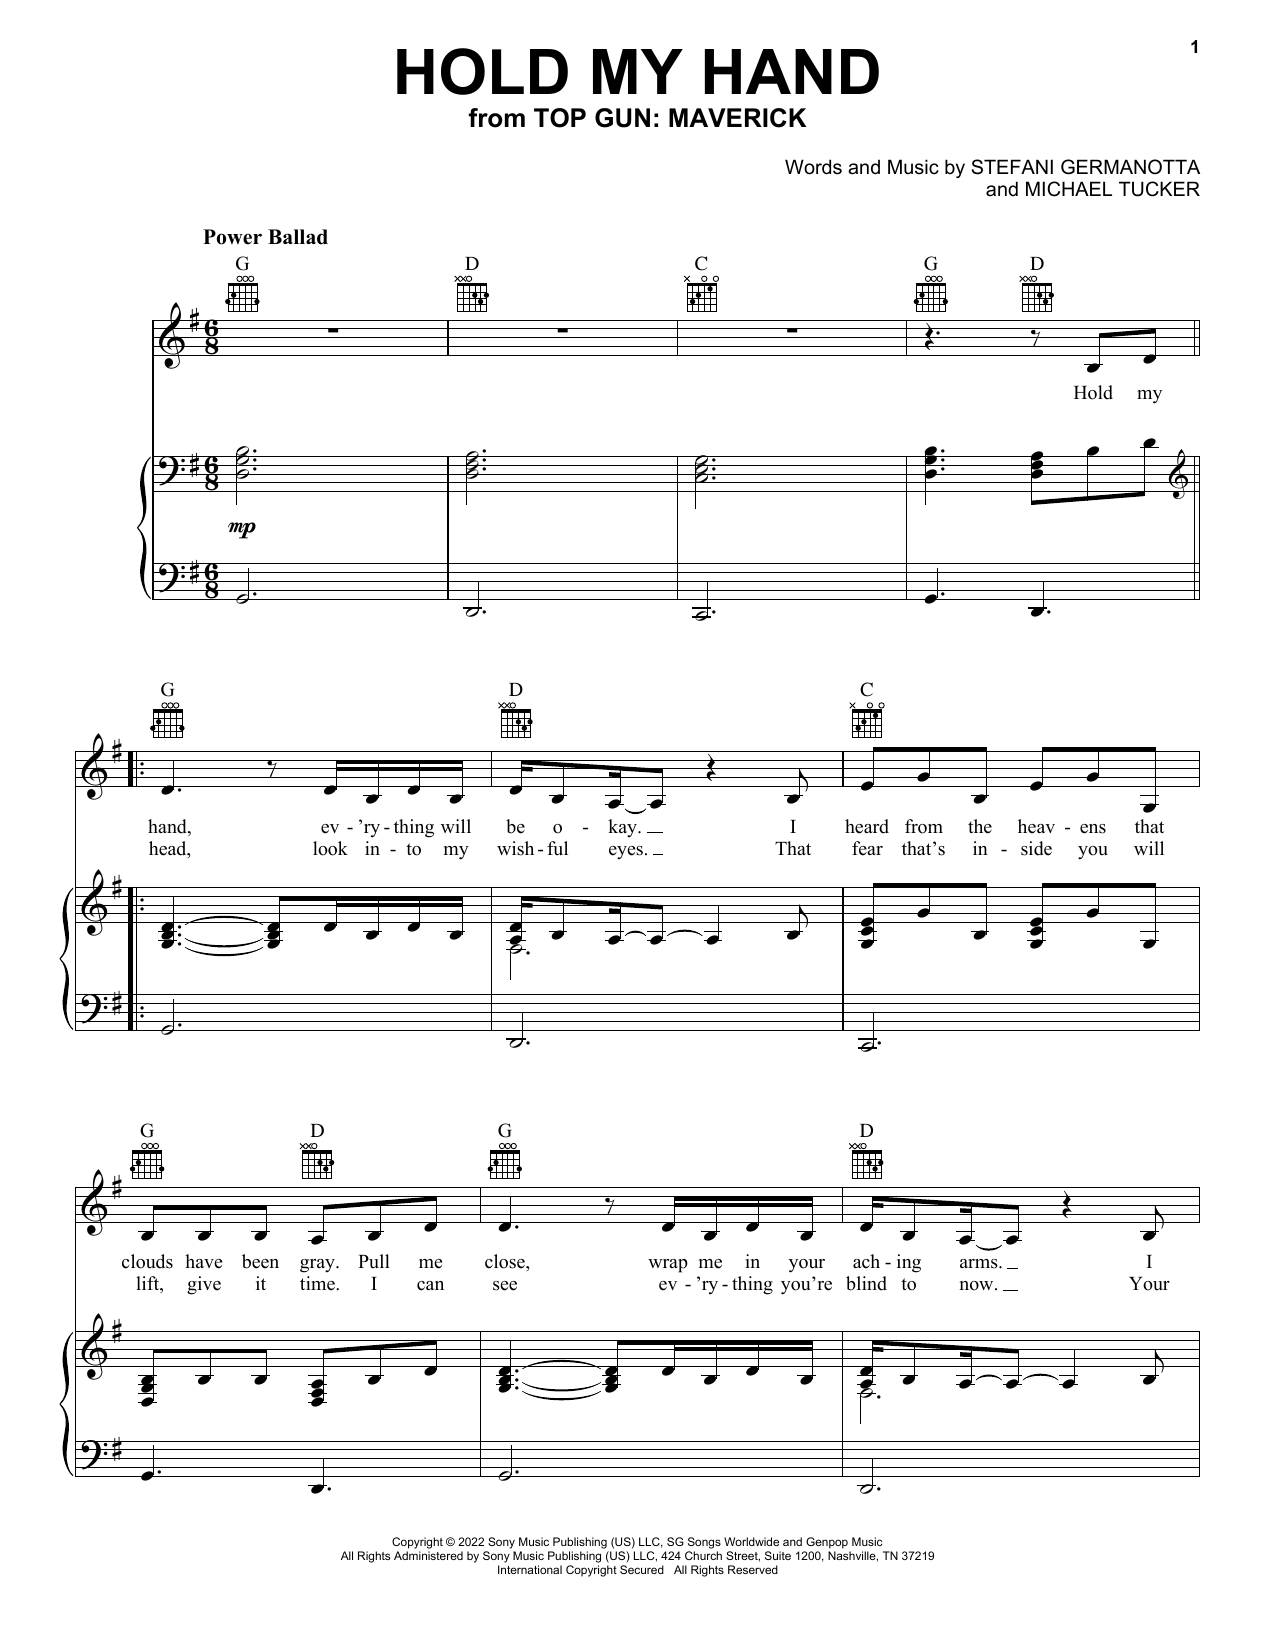 Lady Gaga Hold My Hand sheet music notes and chords. Download Printable PDF.